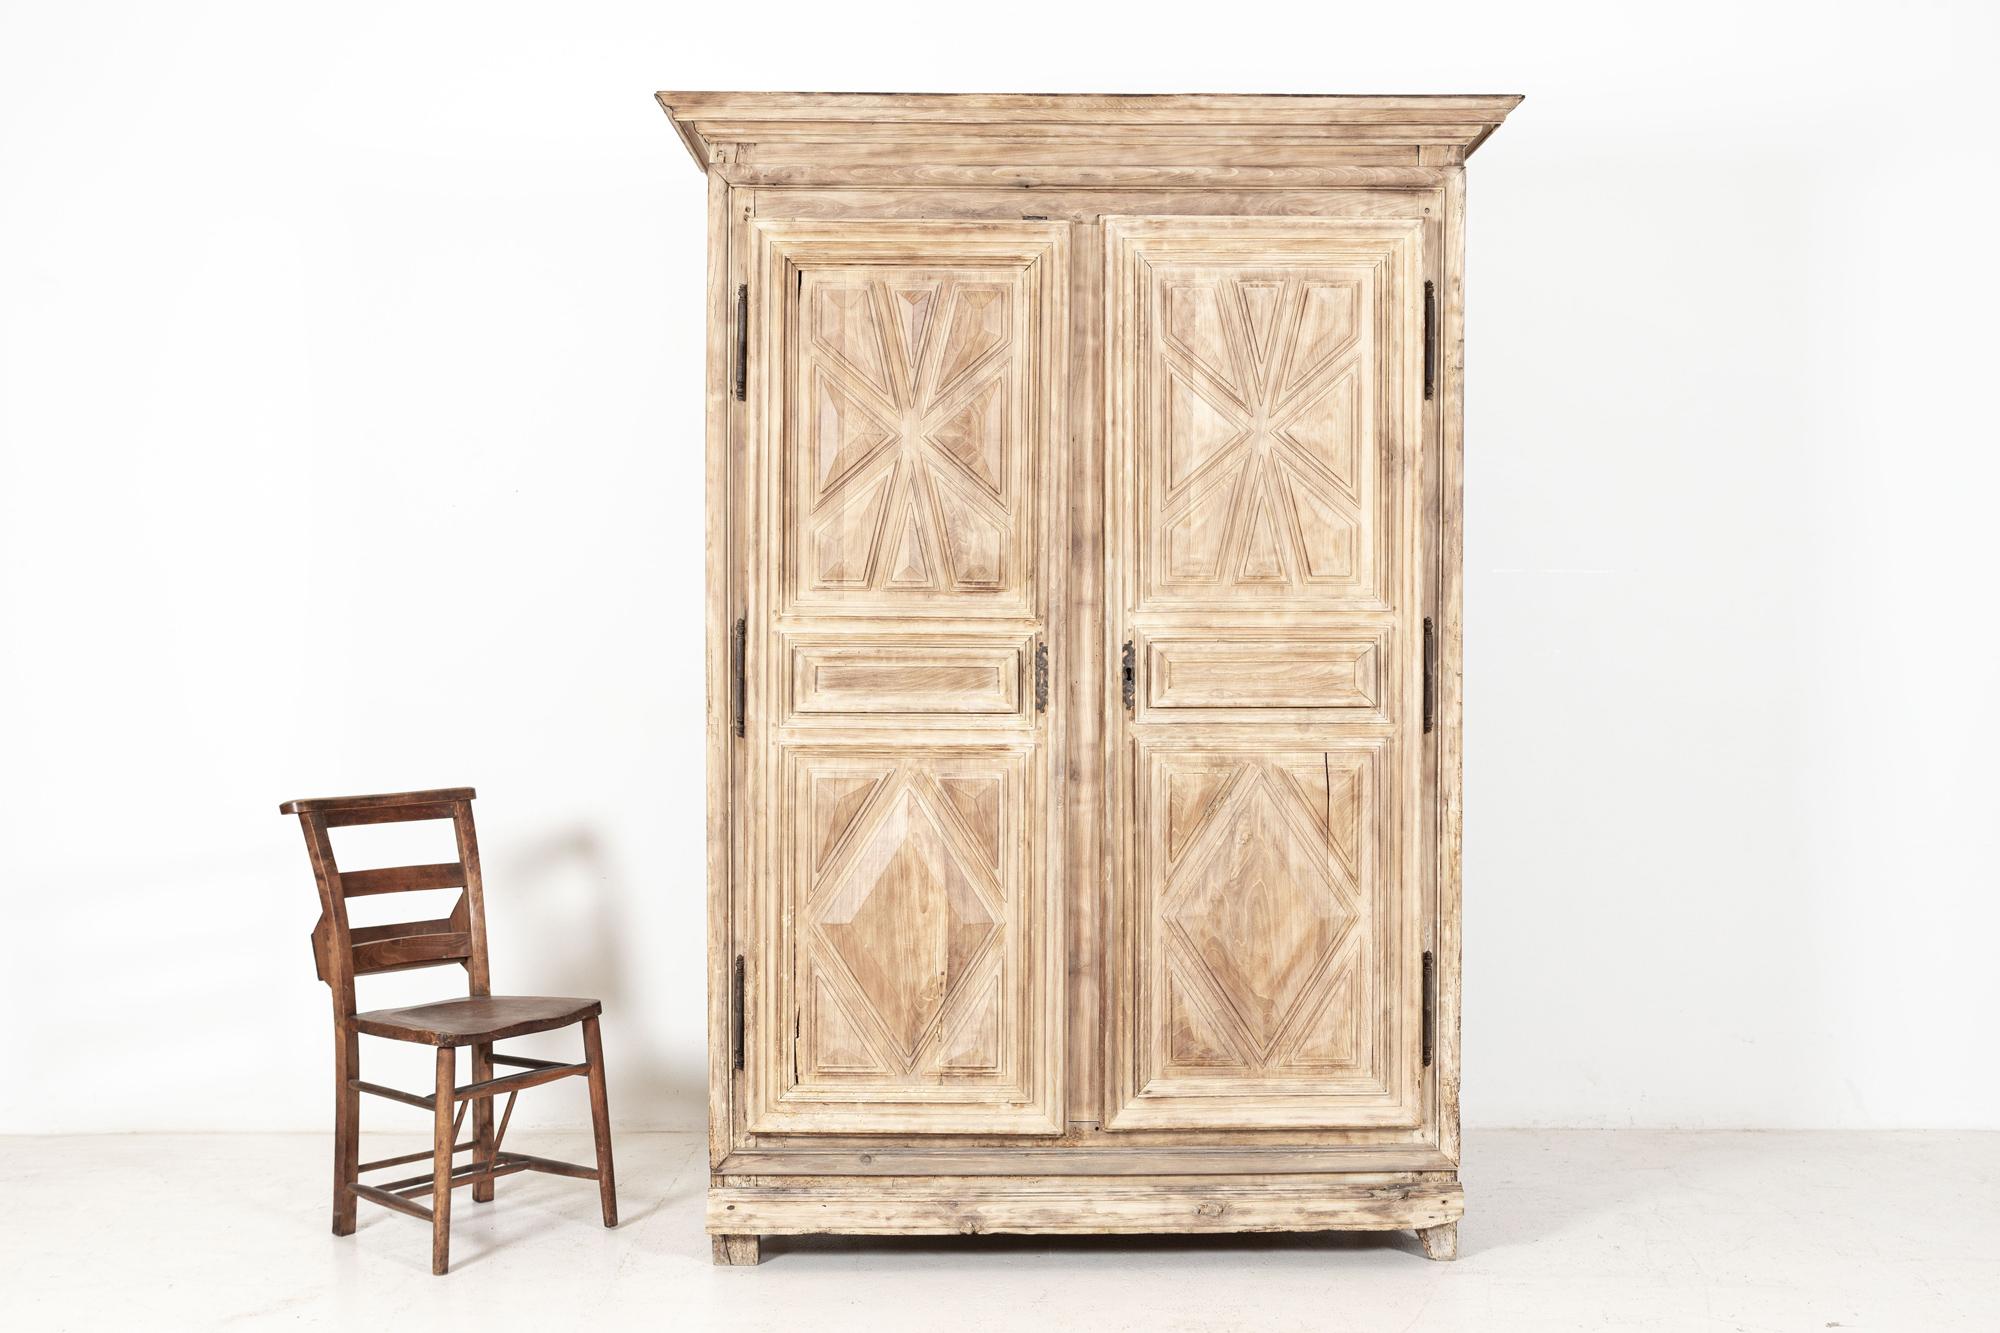 Circa 1660

17thC Louis XIII Bleached Walnut Provincial Armoire

(past woodworm treated)

Sourced from the South of France

Losses/splits

sku 778

W150 x D61 x H207 cm